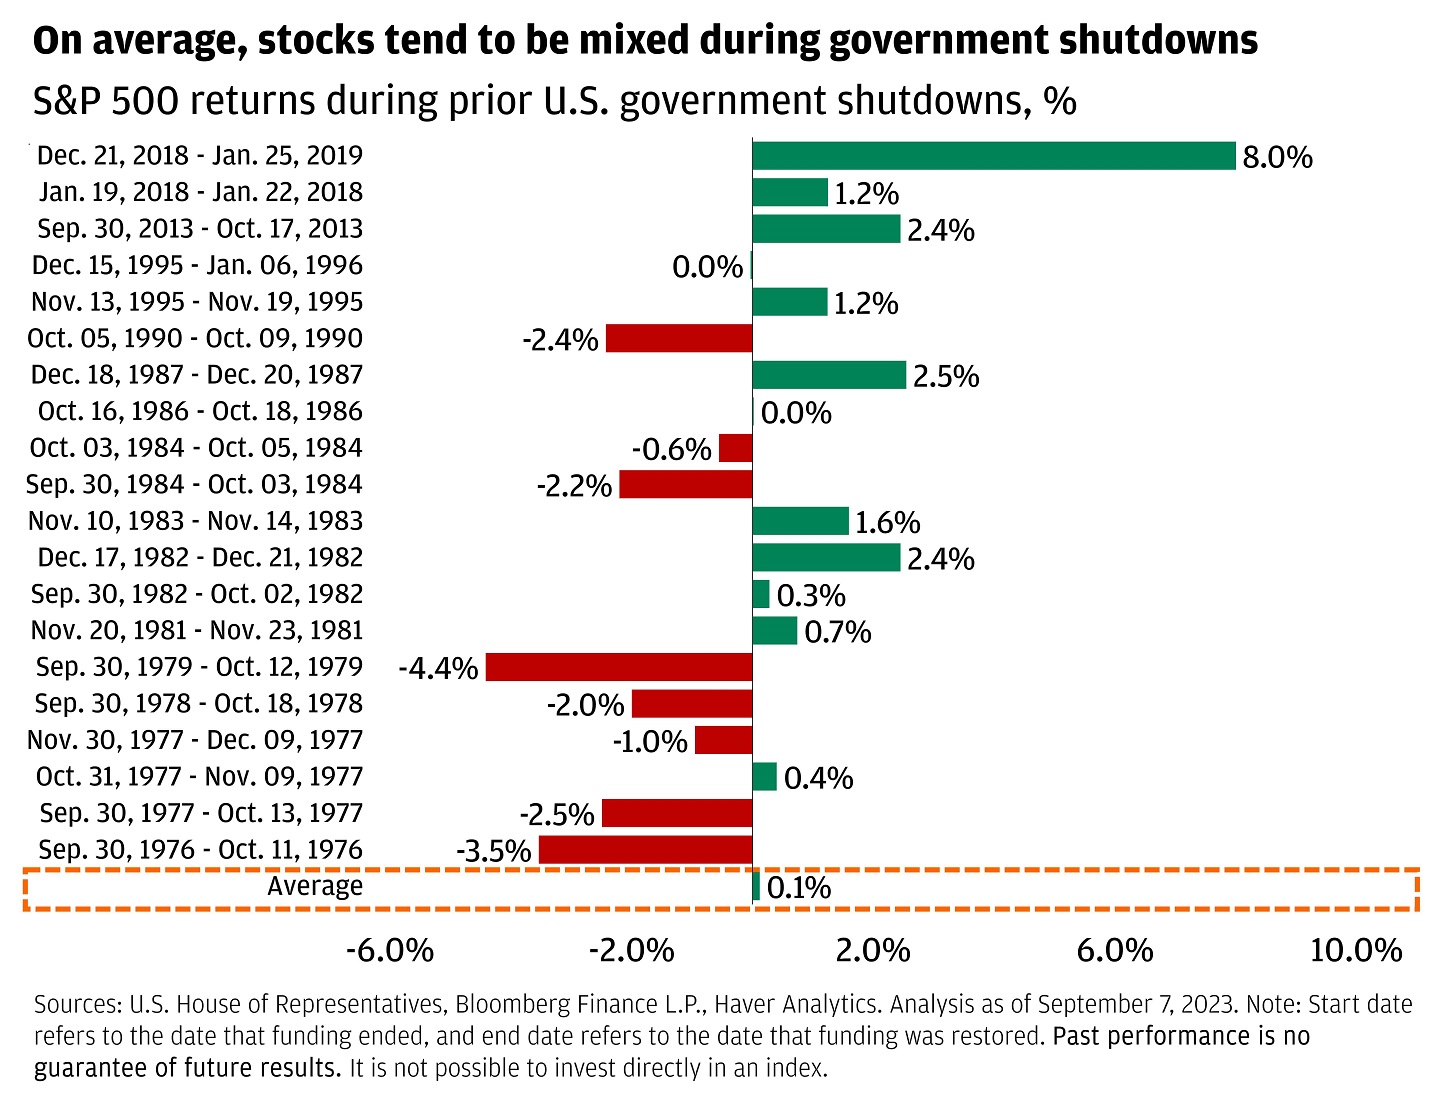 The chart shows the S&P returns during prior U.S. government shutdowns.